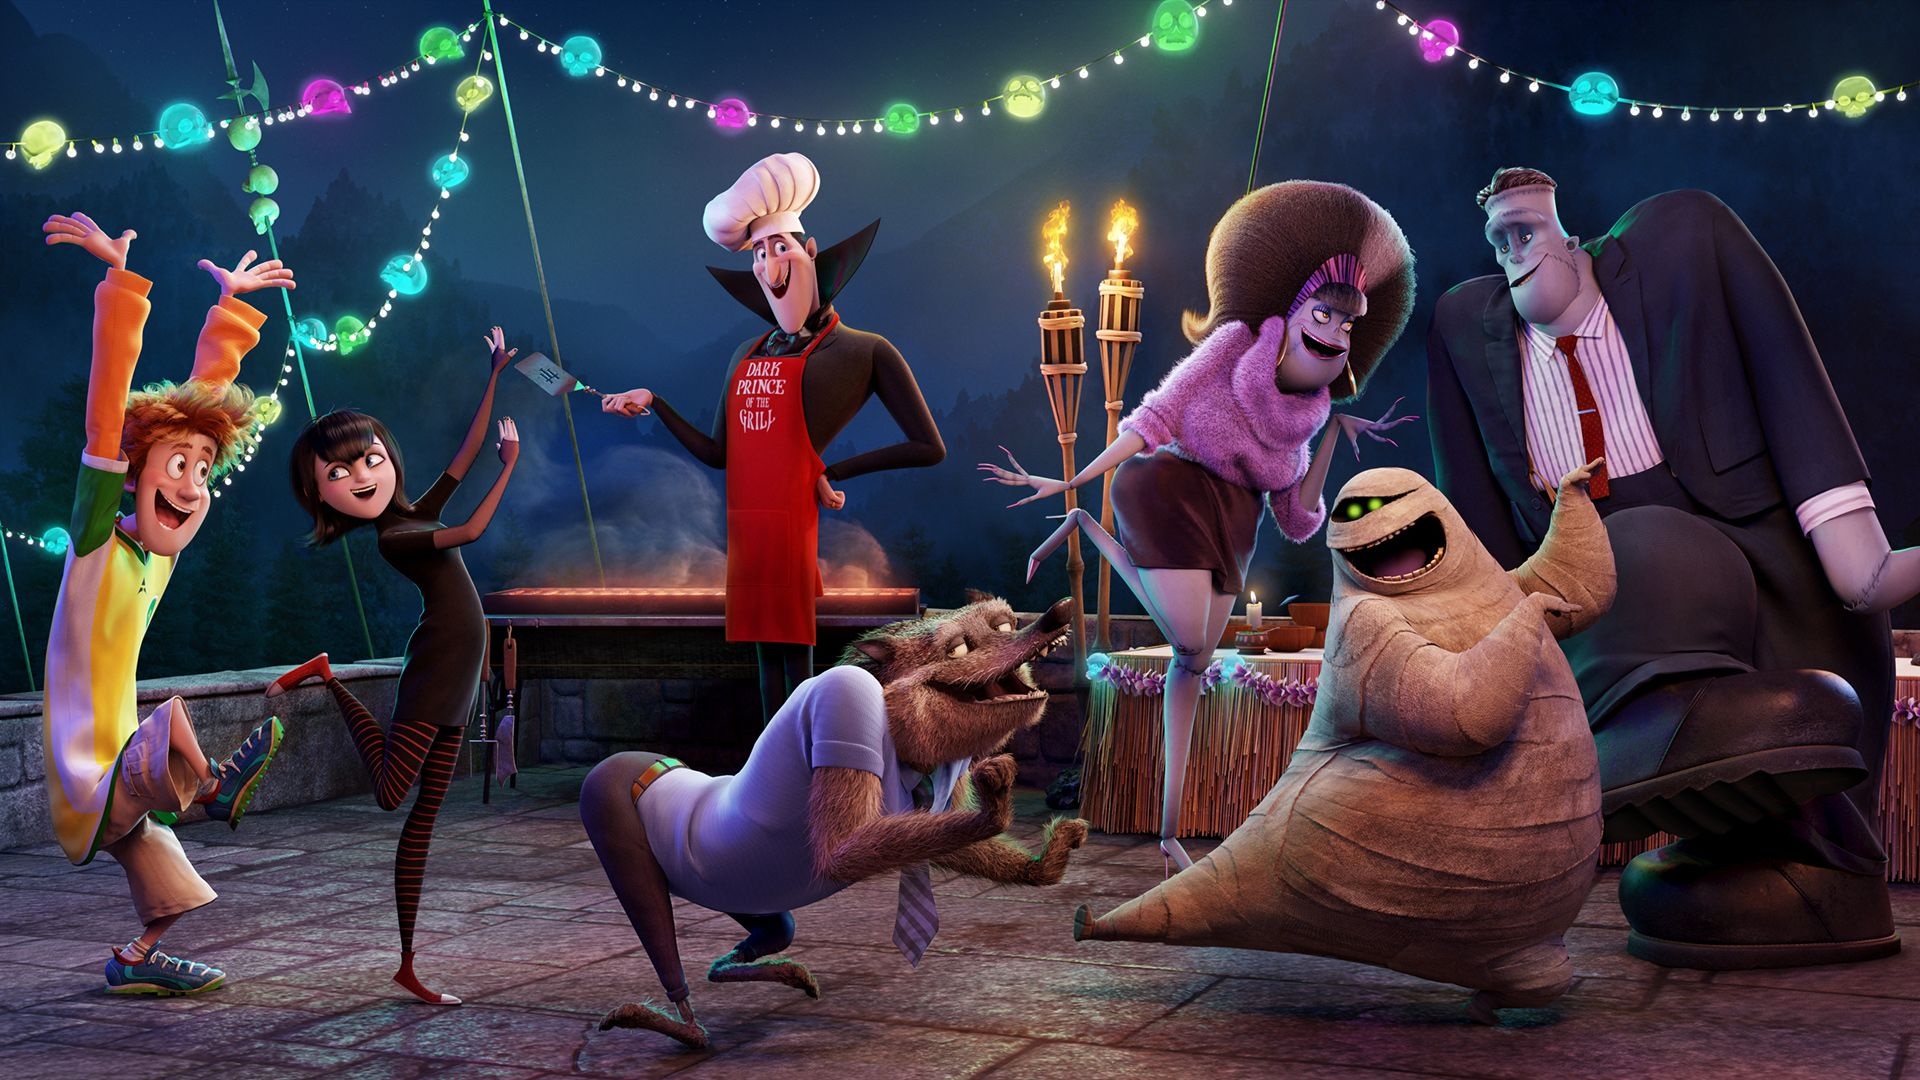 Hotel Transylvania: Monster reuse, Poster recycling, Animated movie, 1920x1080 Full HD Desktop